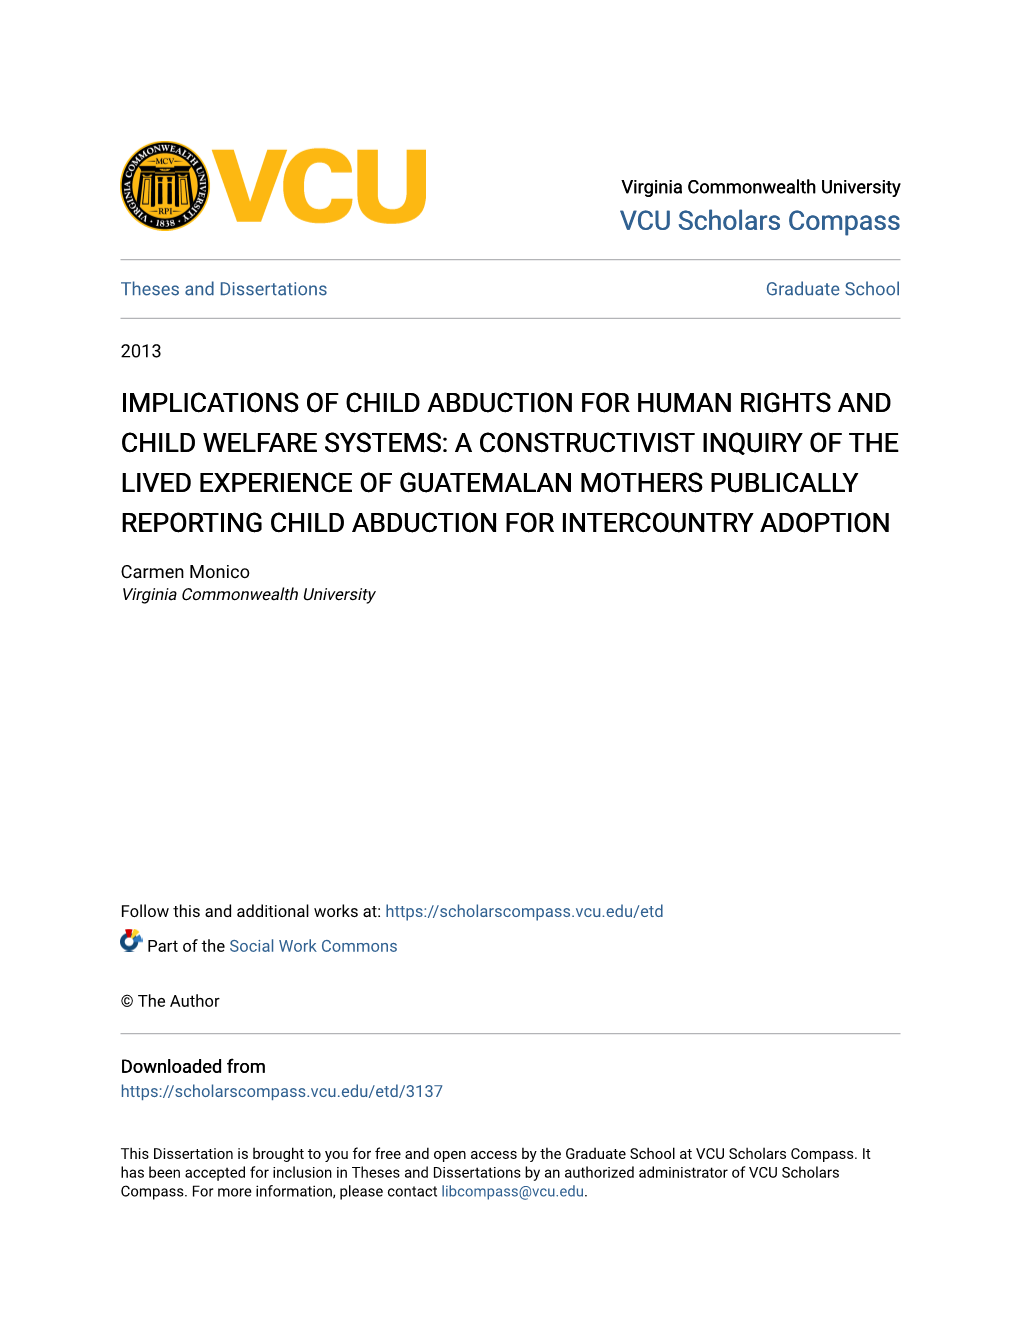 Implications of Child Abduction for Human Rights and Child Welfare